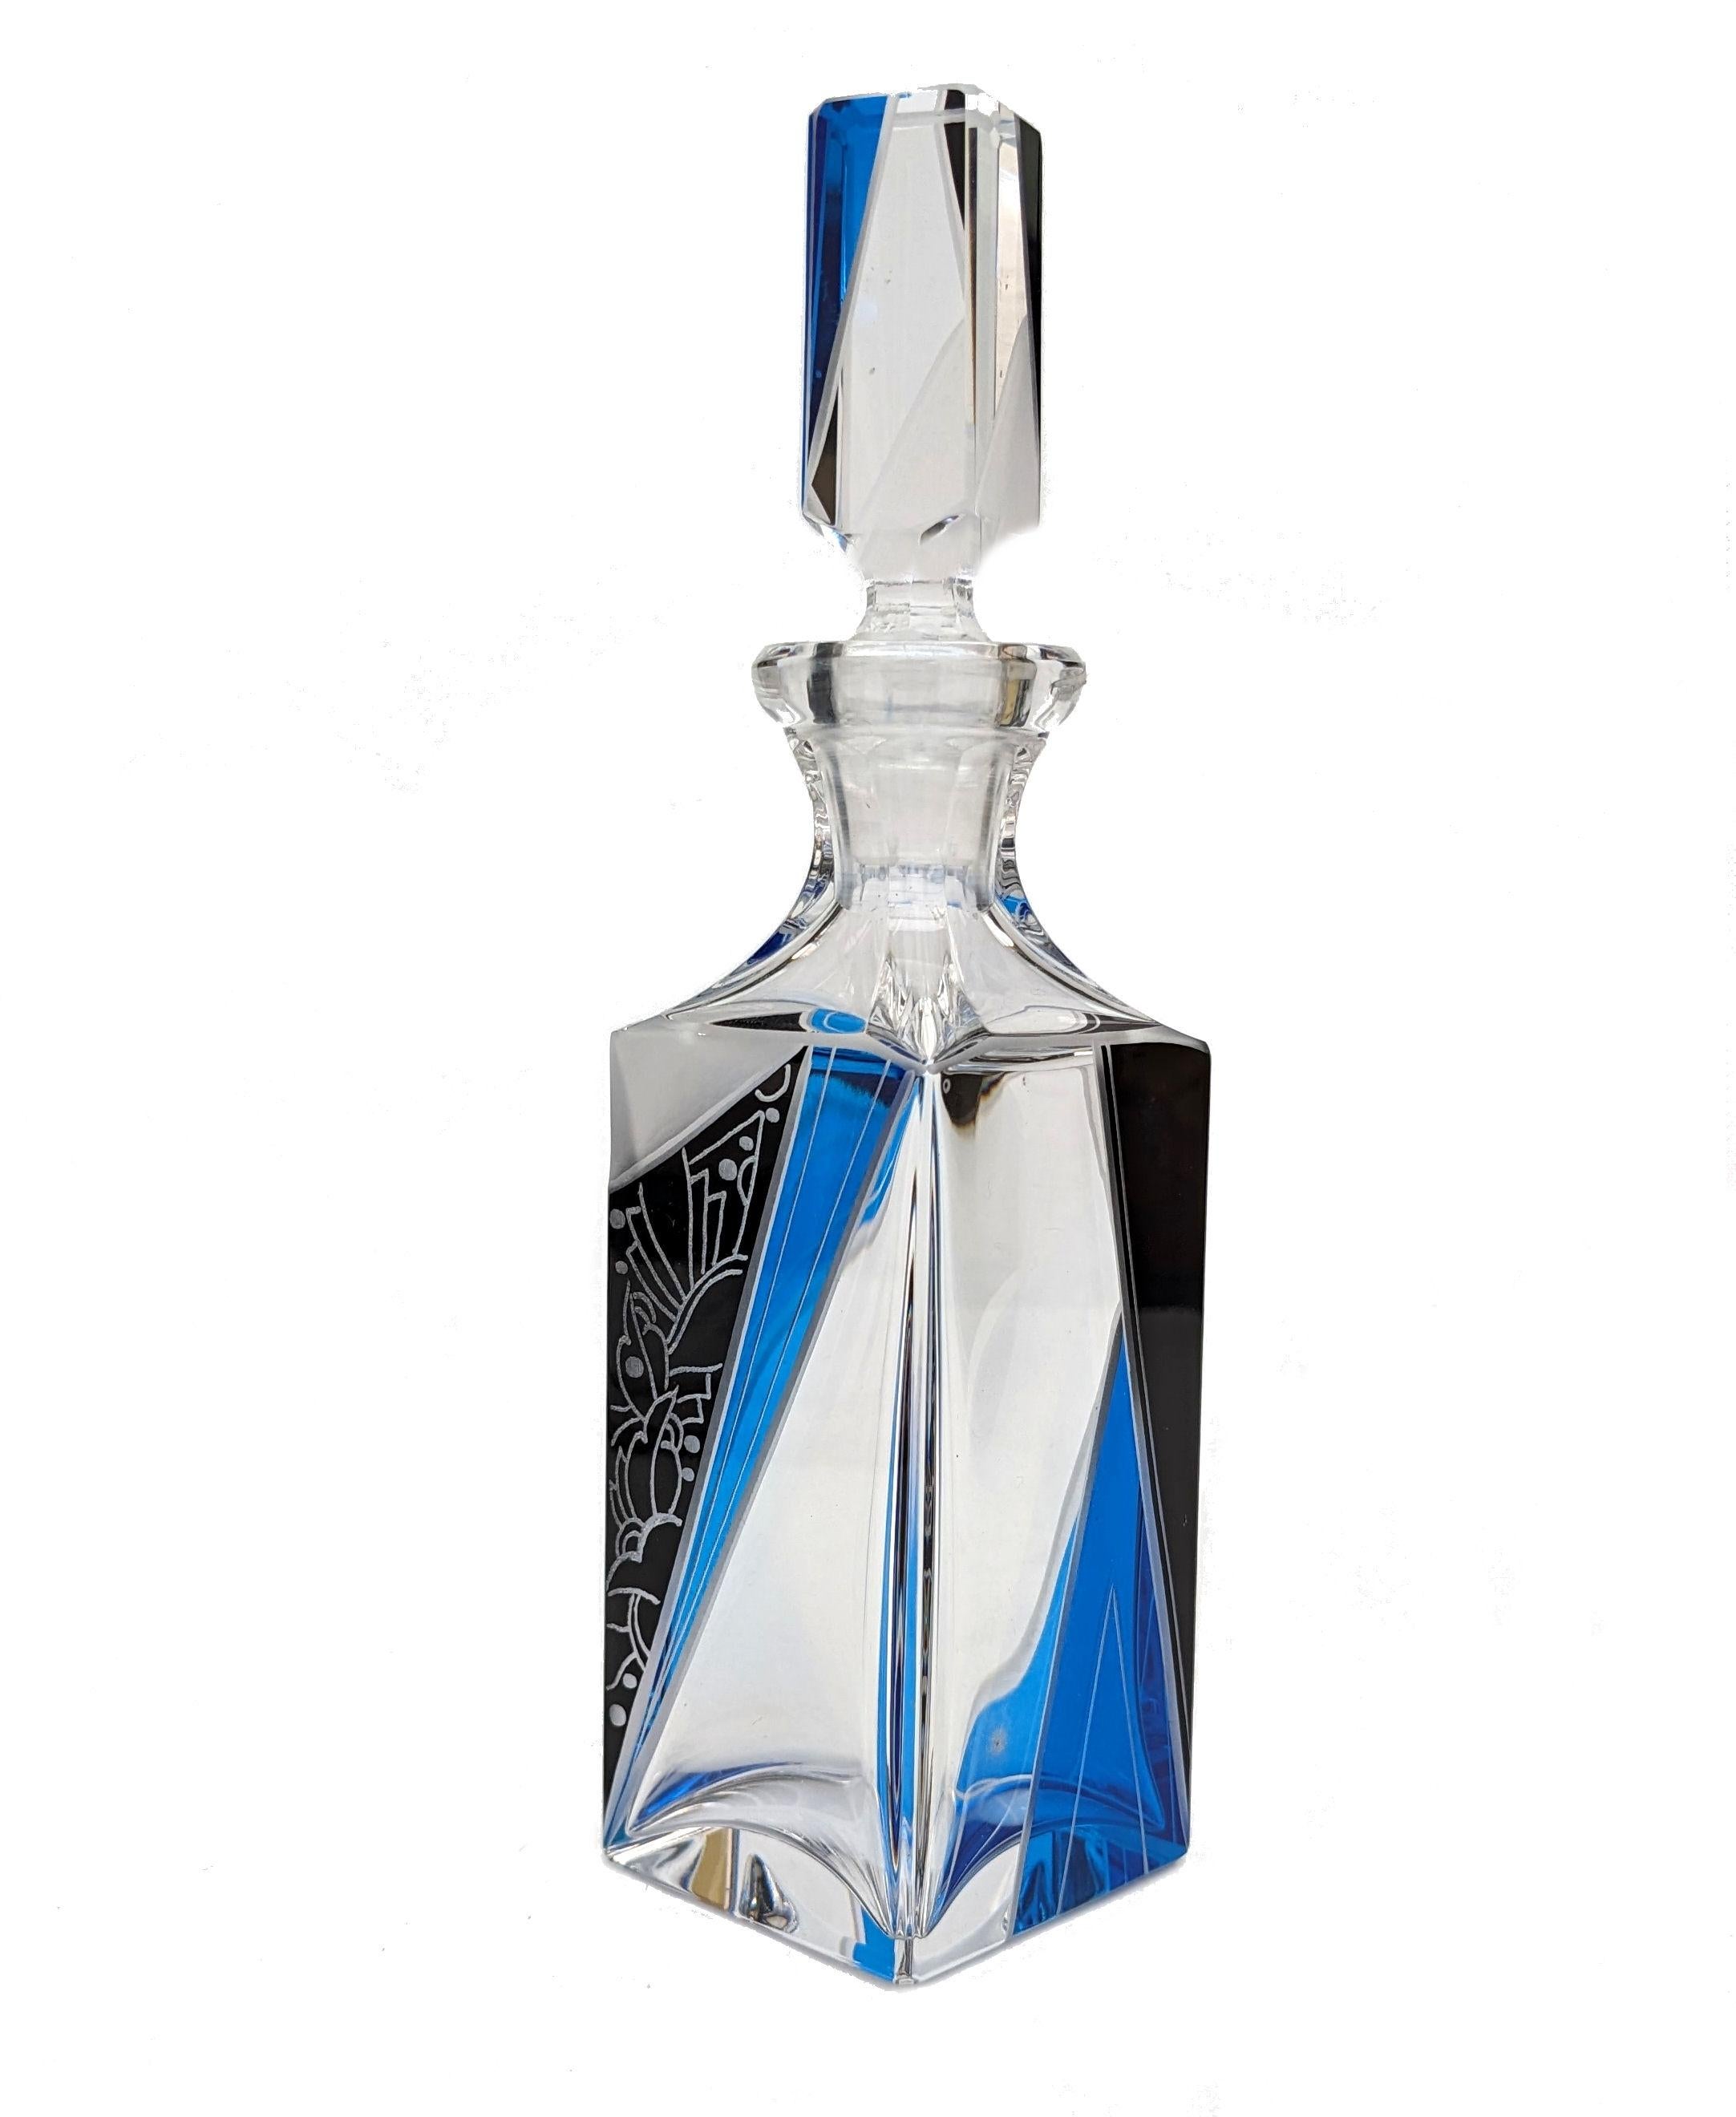 Art Deco large cut glass perfume scent bottle, dating to the 1930's and originating from France. In clear cut glass with vivid blue enamelled geometric design. Glass cut glass stopper. Manufactured in Czech republic in the 1930s this stunning bottle